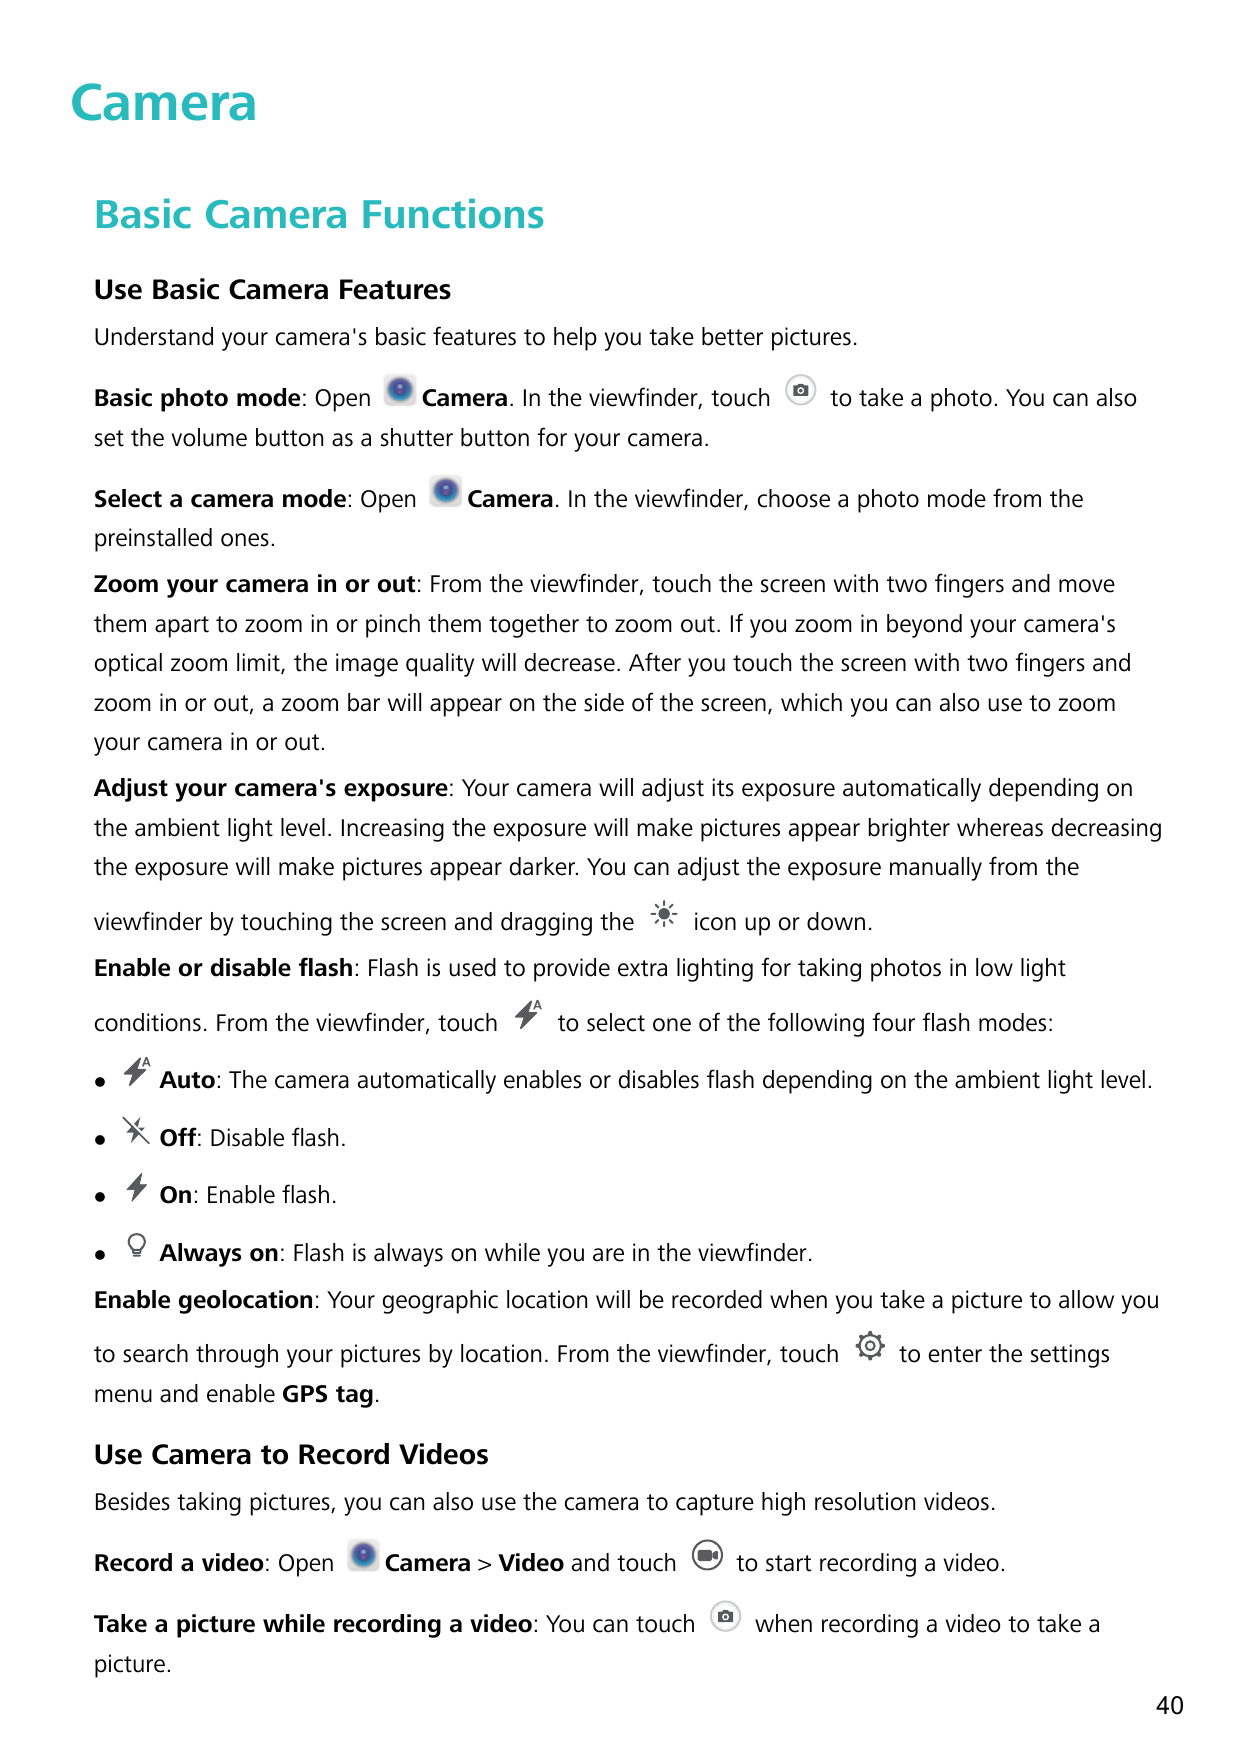 CameraBasic Camera FunctionsUse Basic Camera FeaturesUnderstand your camera's basic features to help you take better pictures.Ba